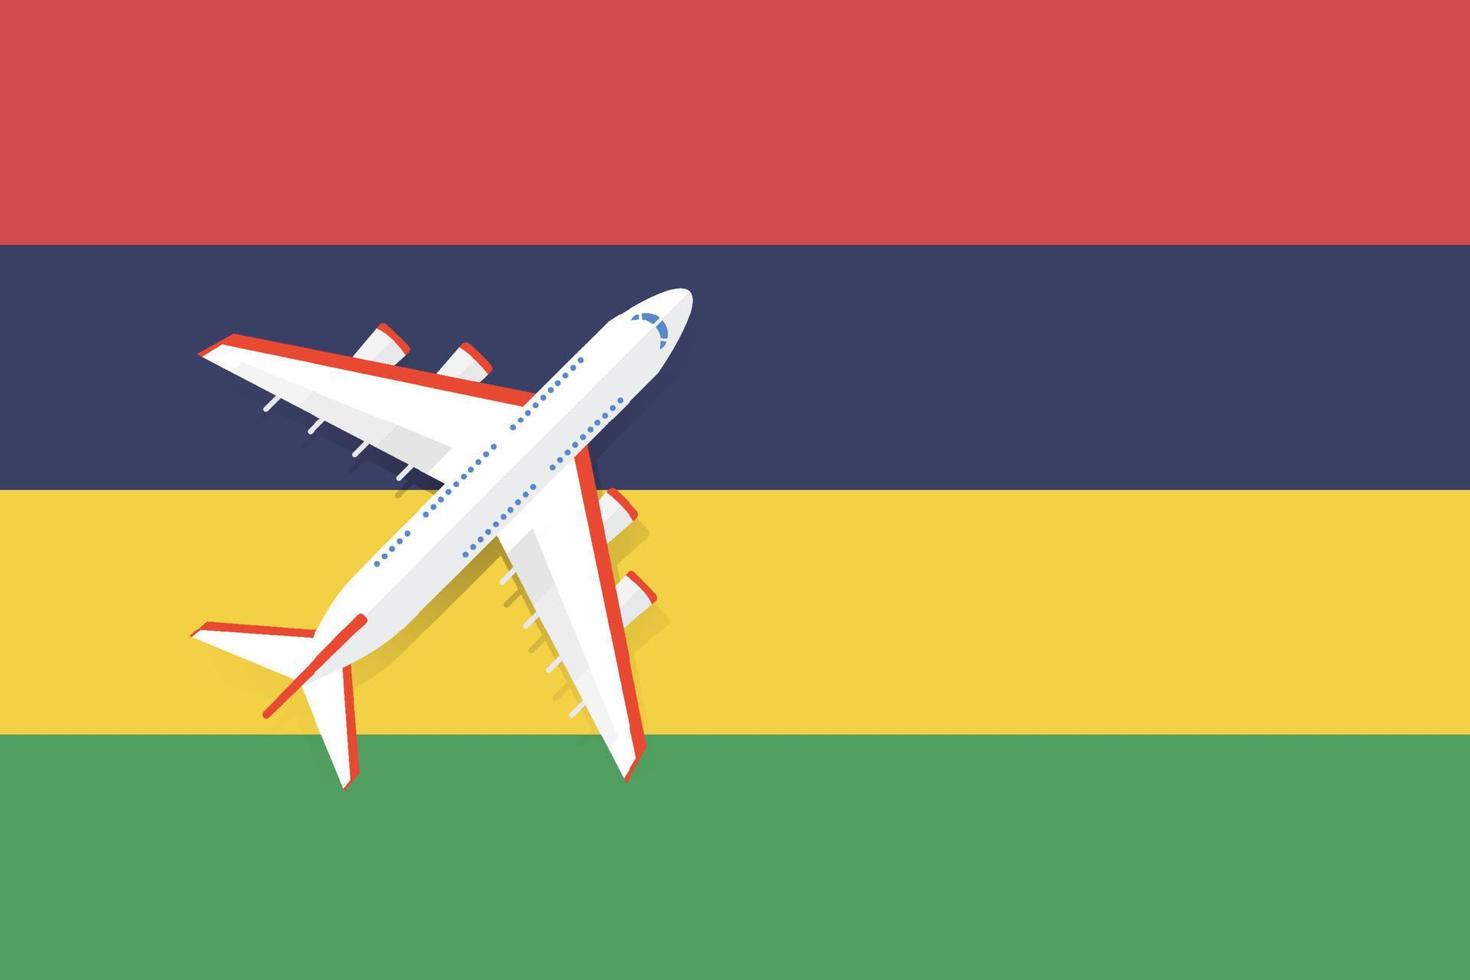 Vector Illustration of a passenger plane flying over the flag of Mauritius. Concept of tourism and travel